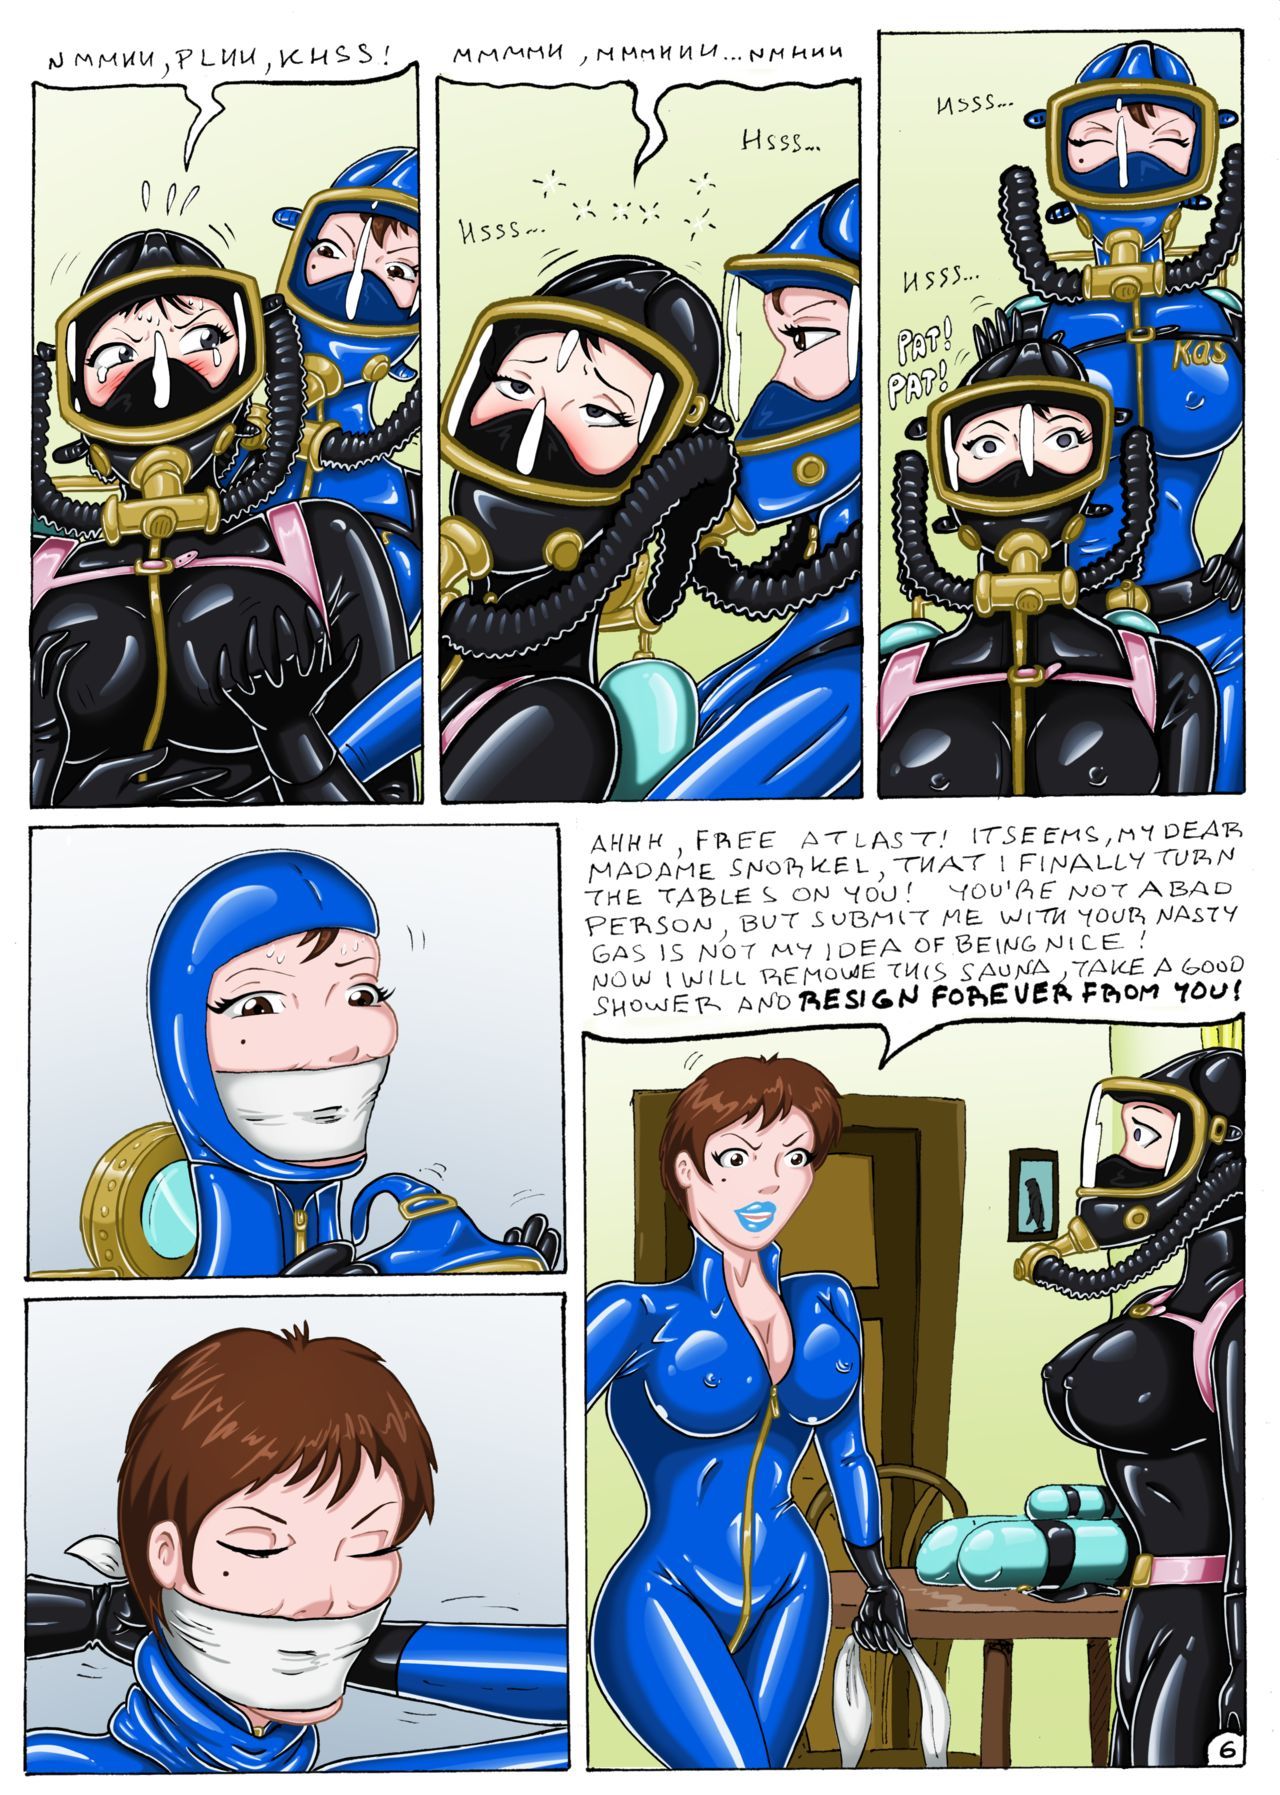 Get a Wetsuit Continued by Osvaldo Greco page 6